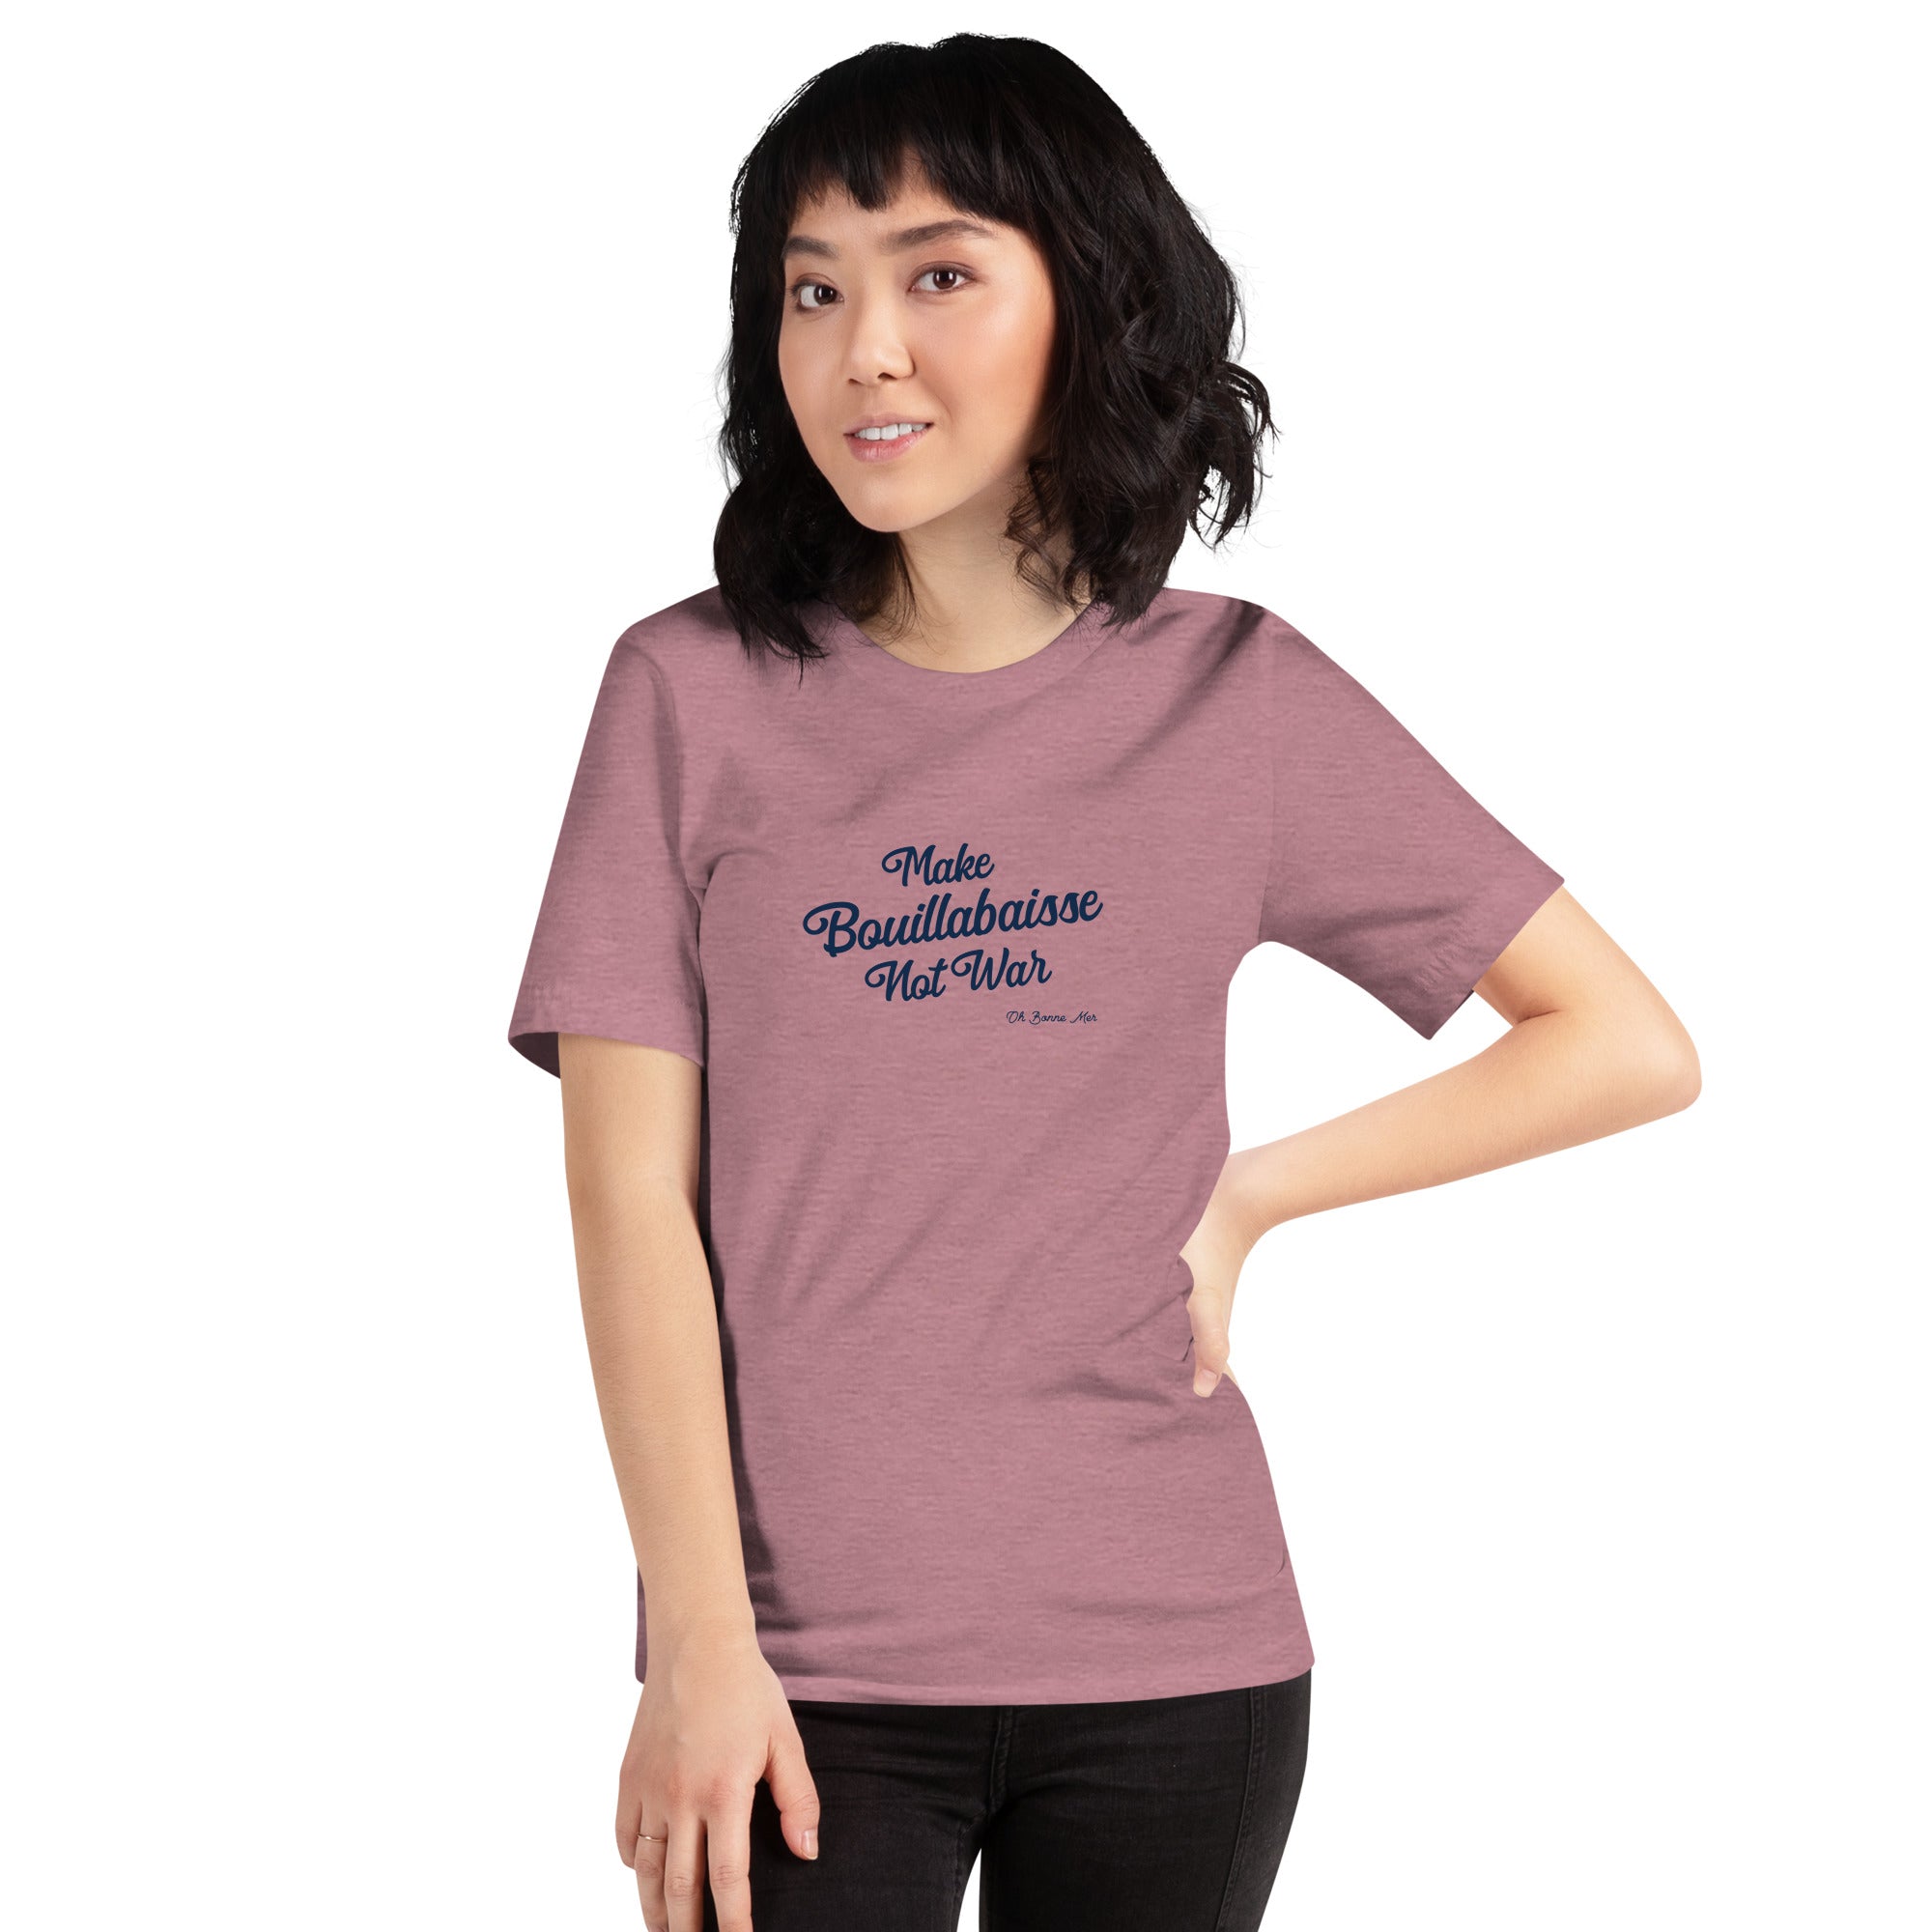 Unisex t-shirt Make Bouillabaisse Not War Text Only on bright heather colors